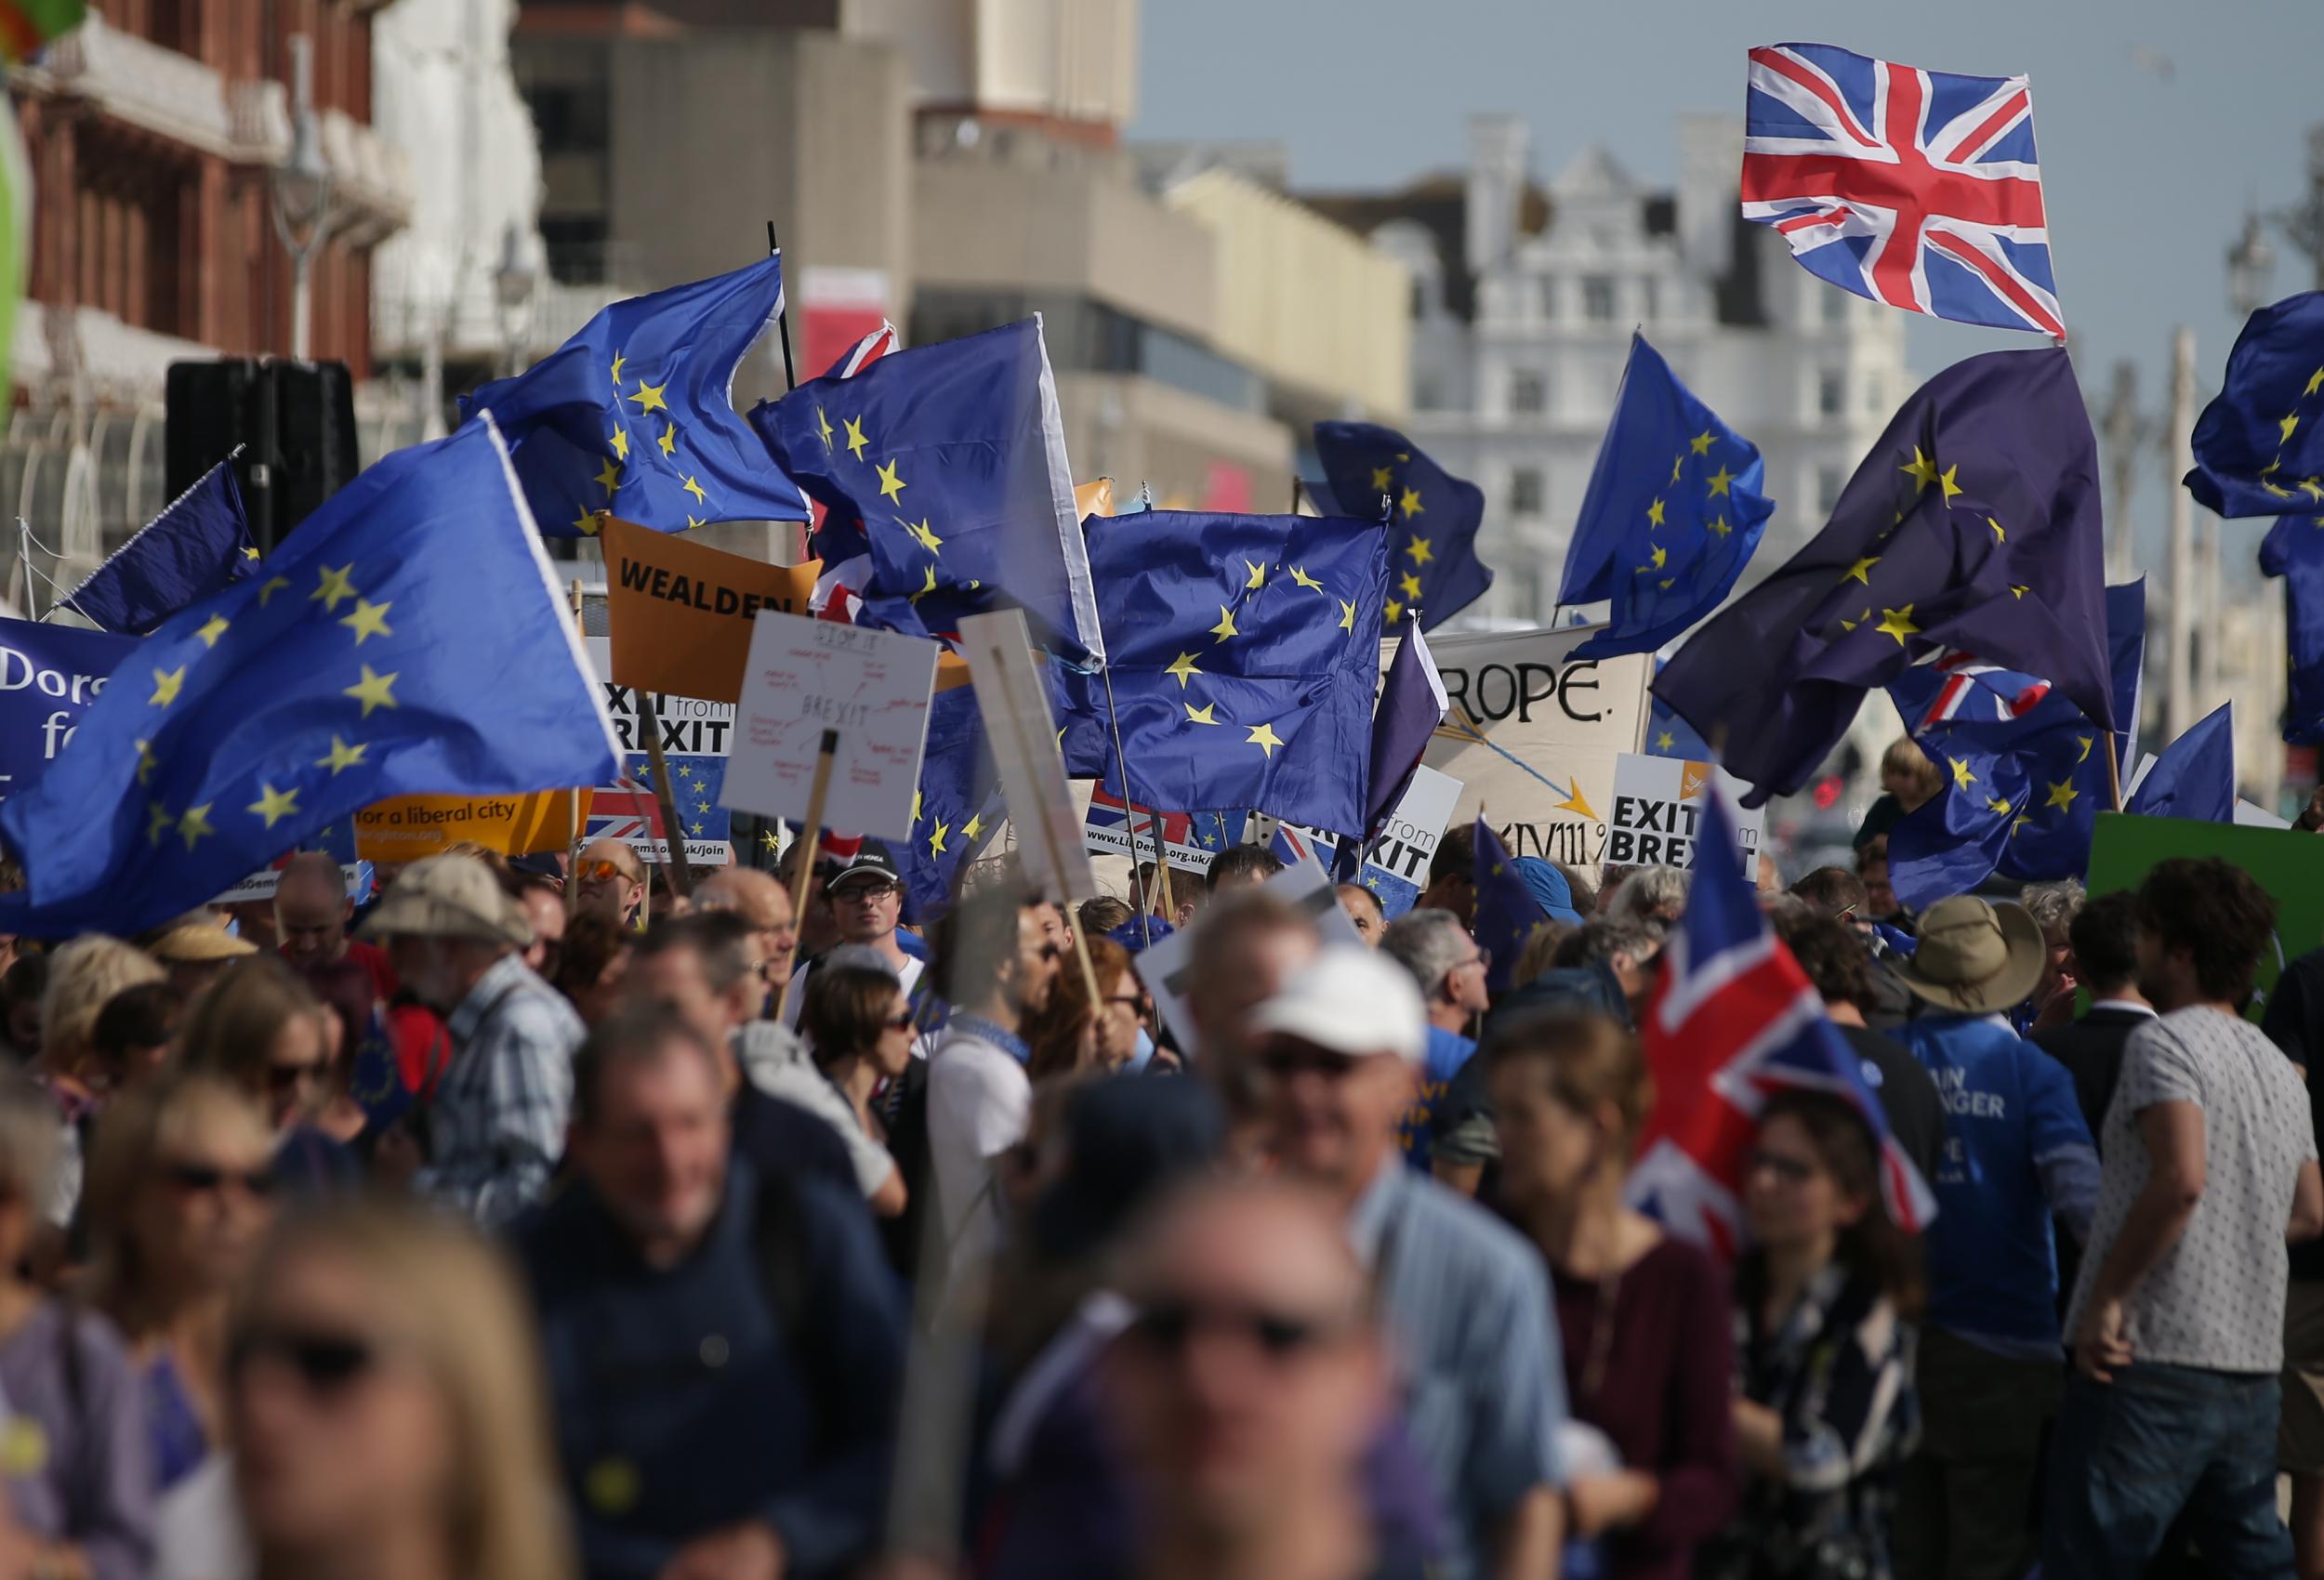 It comes as leading political figures debate whether the country needs a further referendum to decide on Brexit, once terms of departure are known